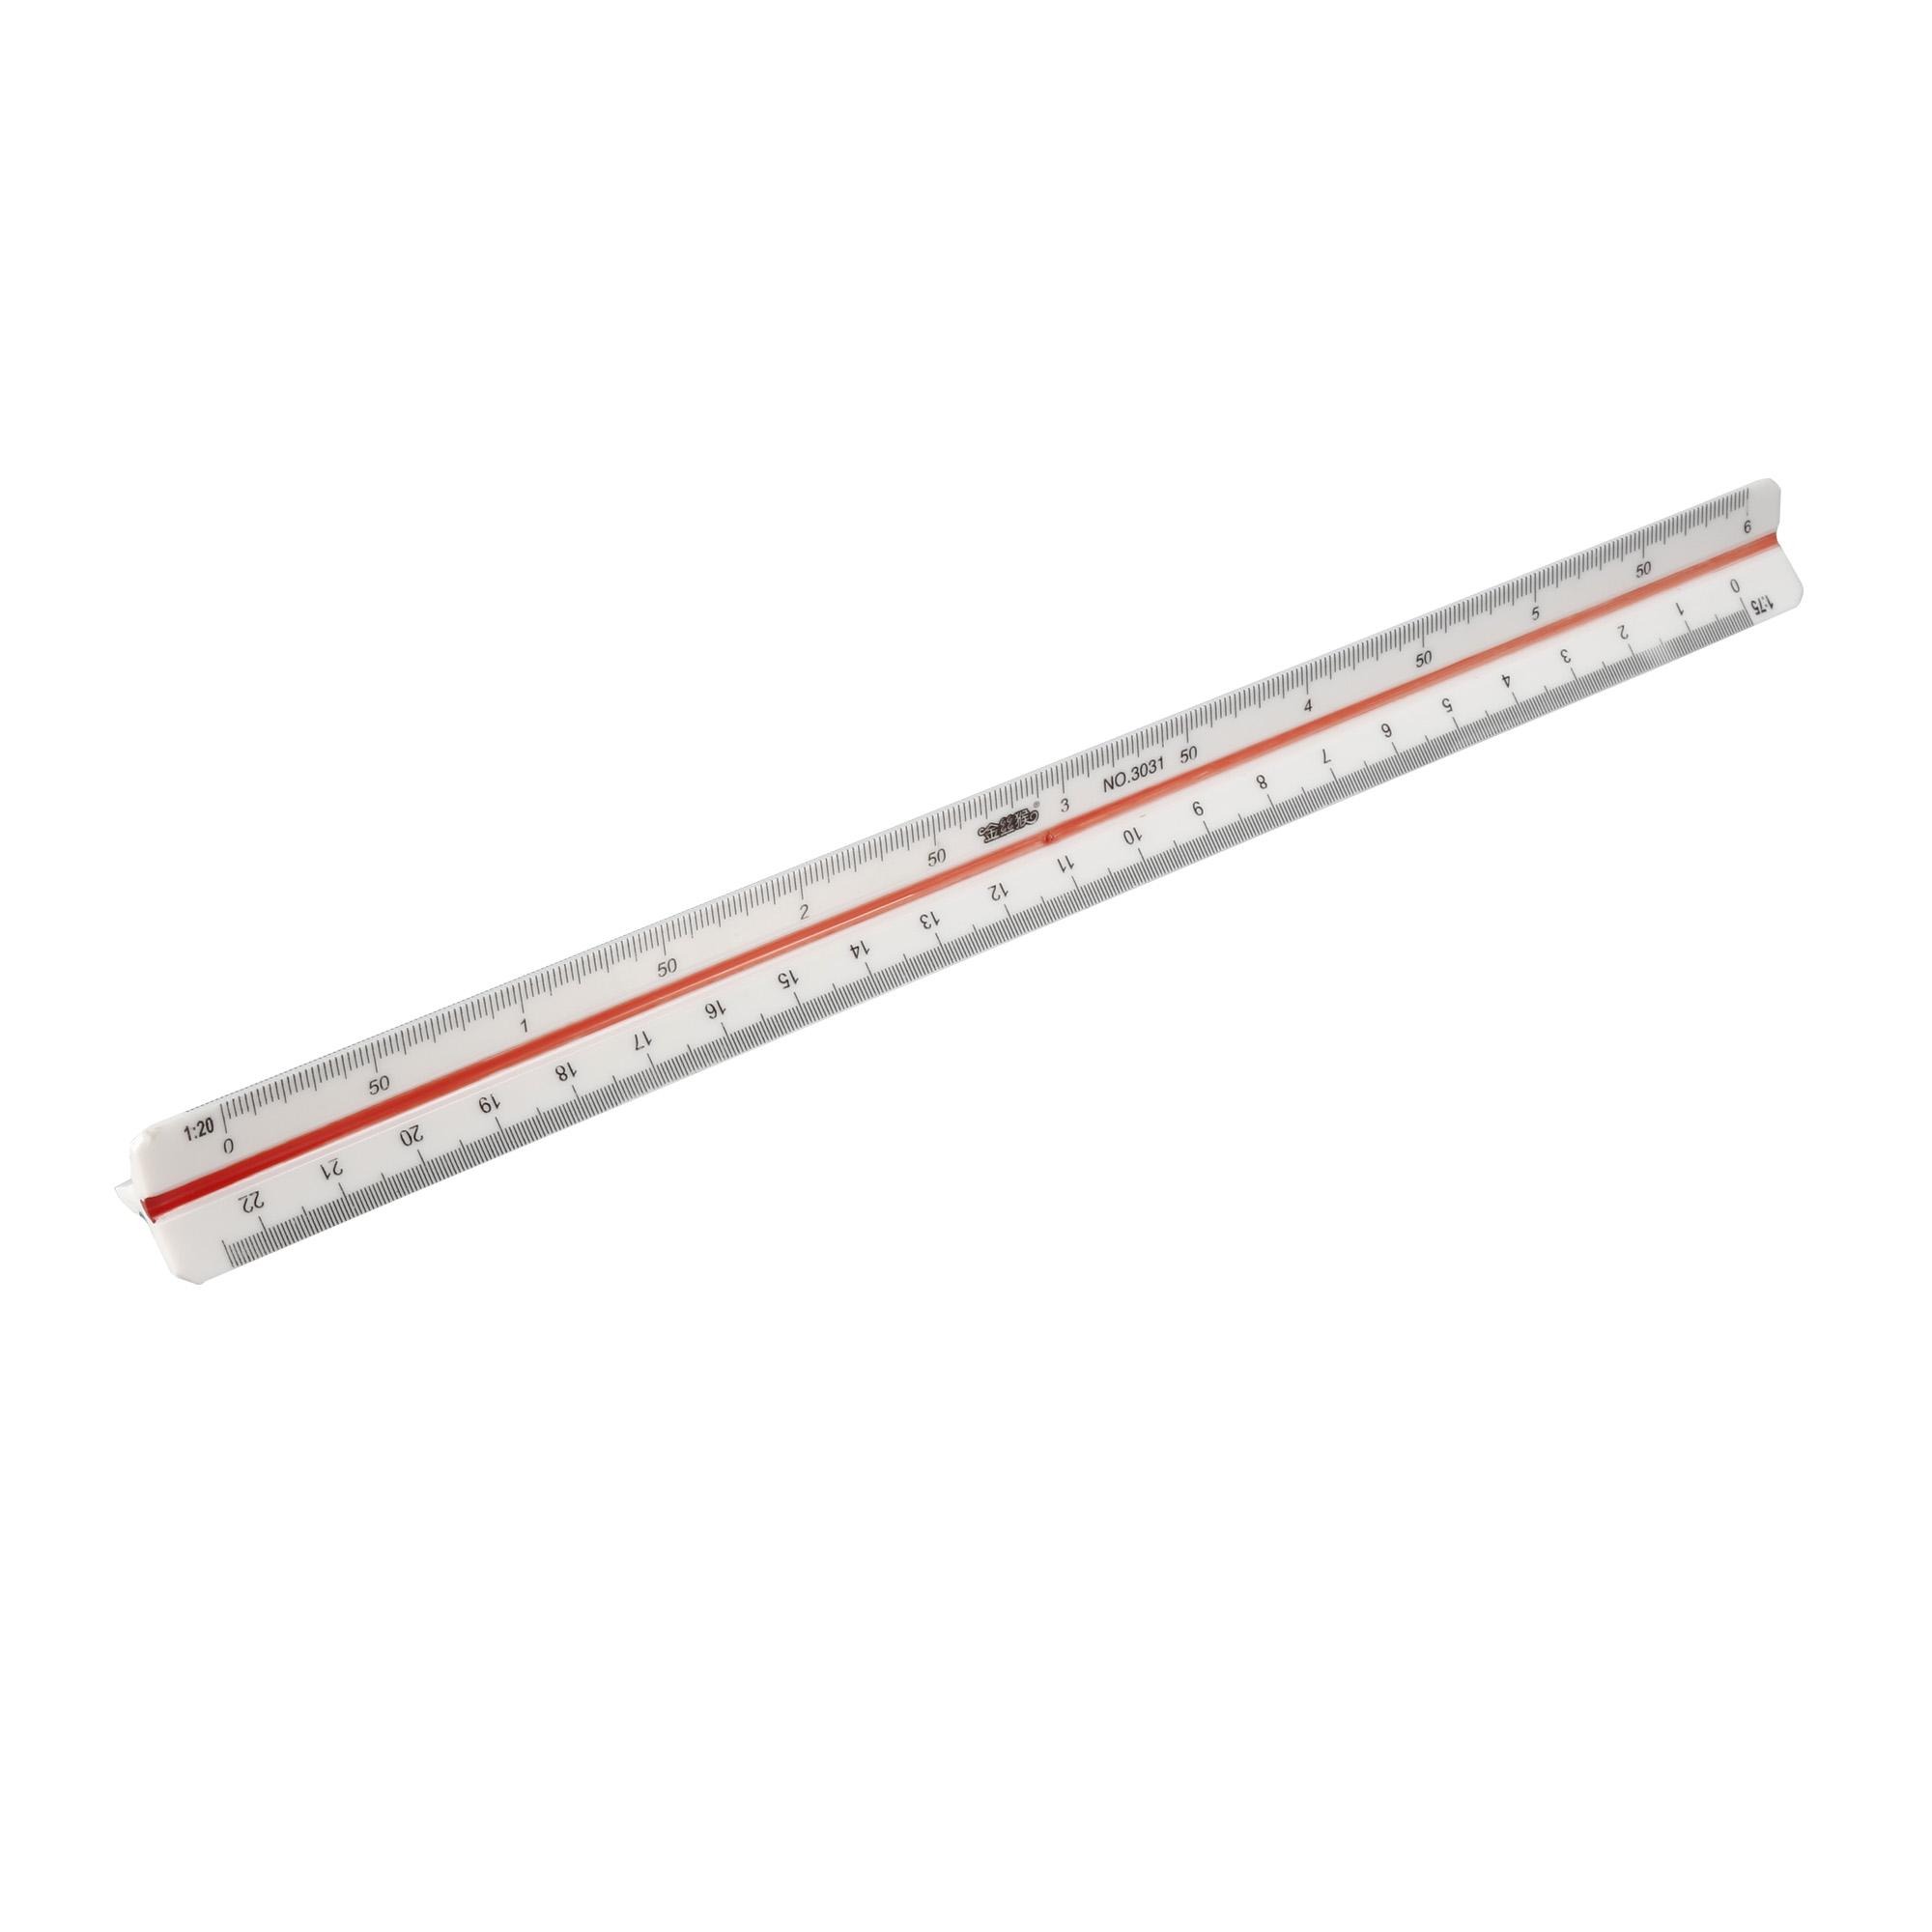 Detail To Scale Ruler Image Nomer 56